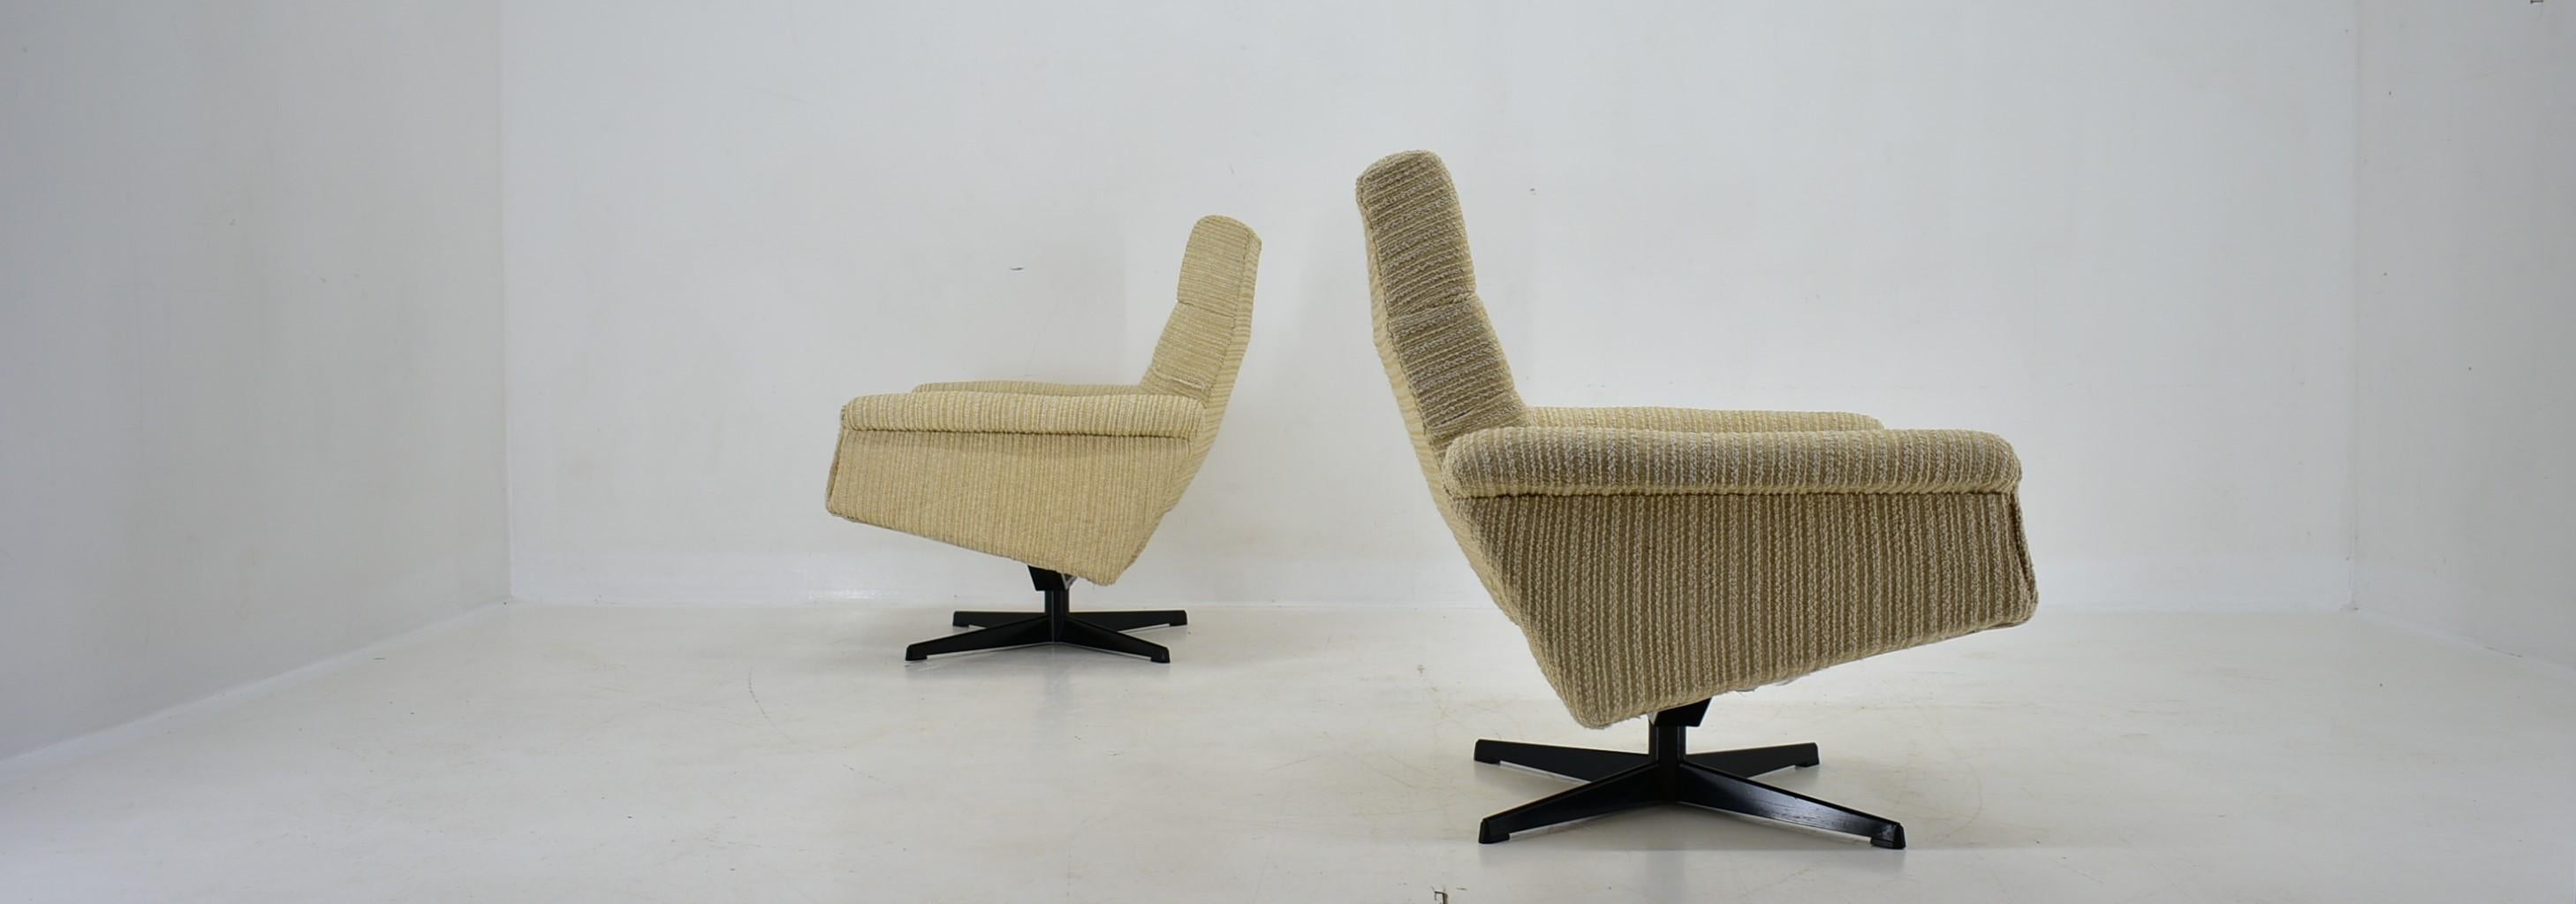 Fabric Pair of Armchairs, Tabouret by Morávek a Munzar, 1968s For Sale